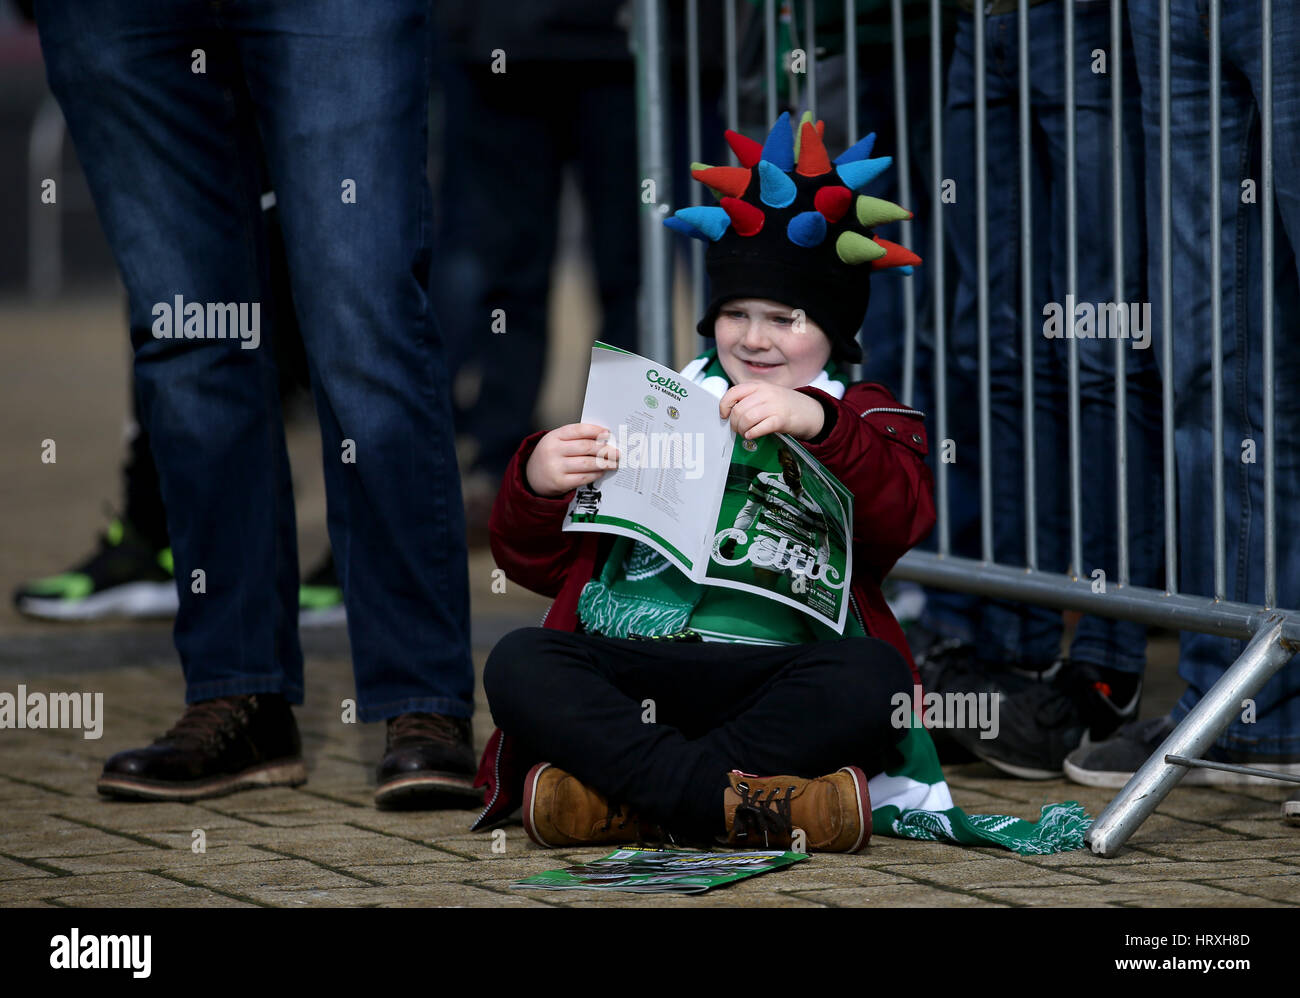 Young Celtic fan Rory Durrant, aged 5, from East Lothian, reads his match programme before attending his very first football match, the Ladbrokes Scottish Premiership match at Celtic Park, Glasgow. Stock Photo